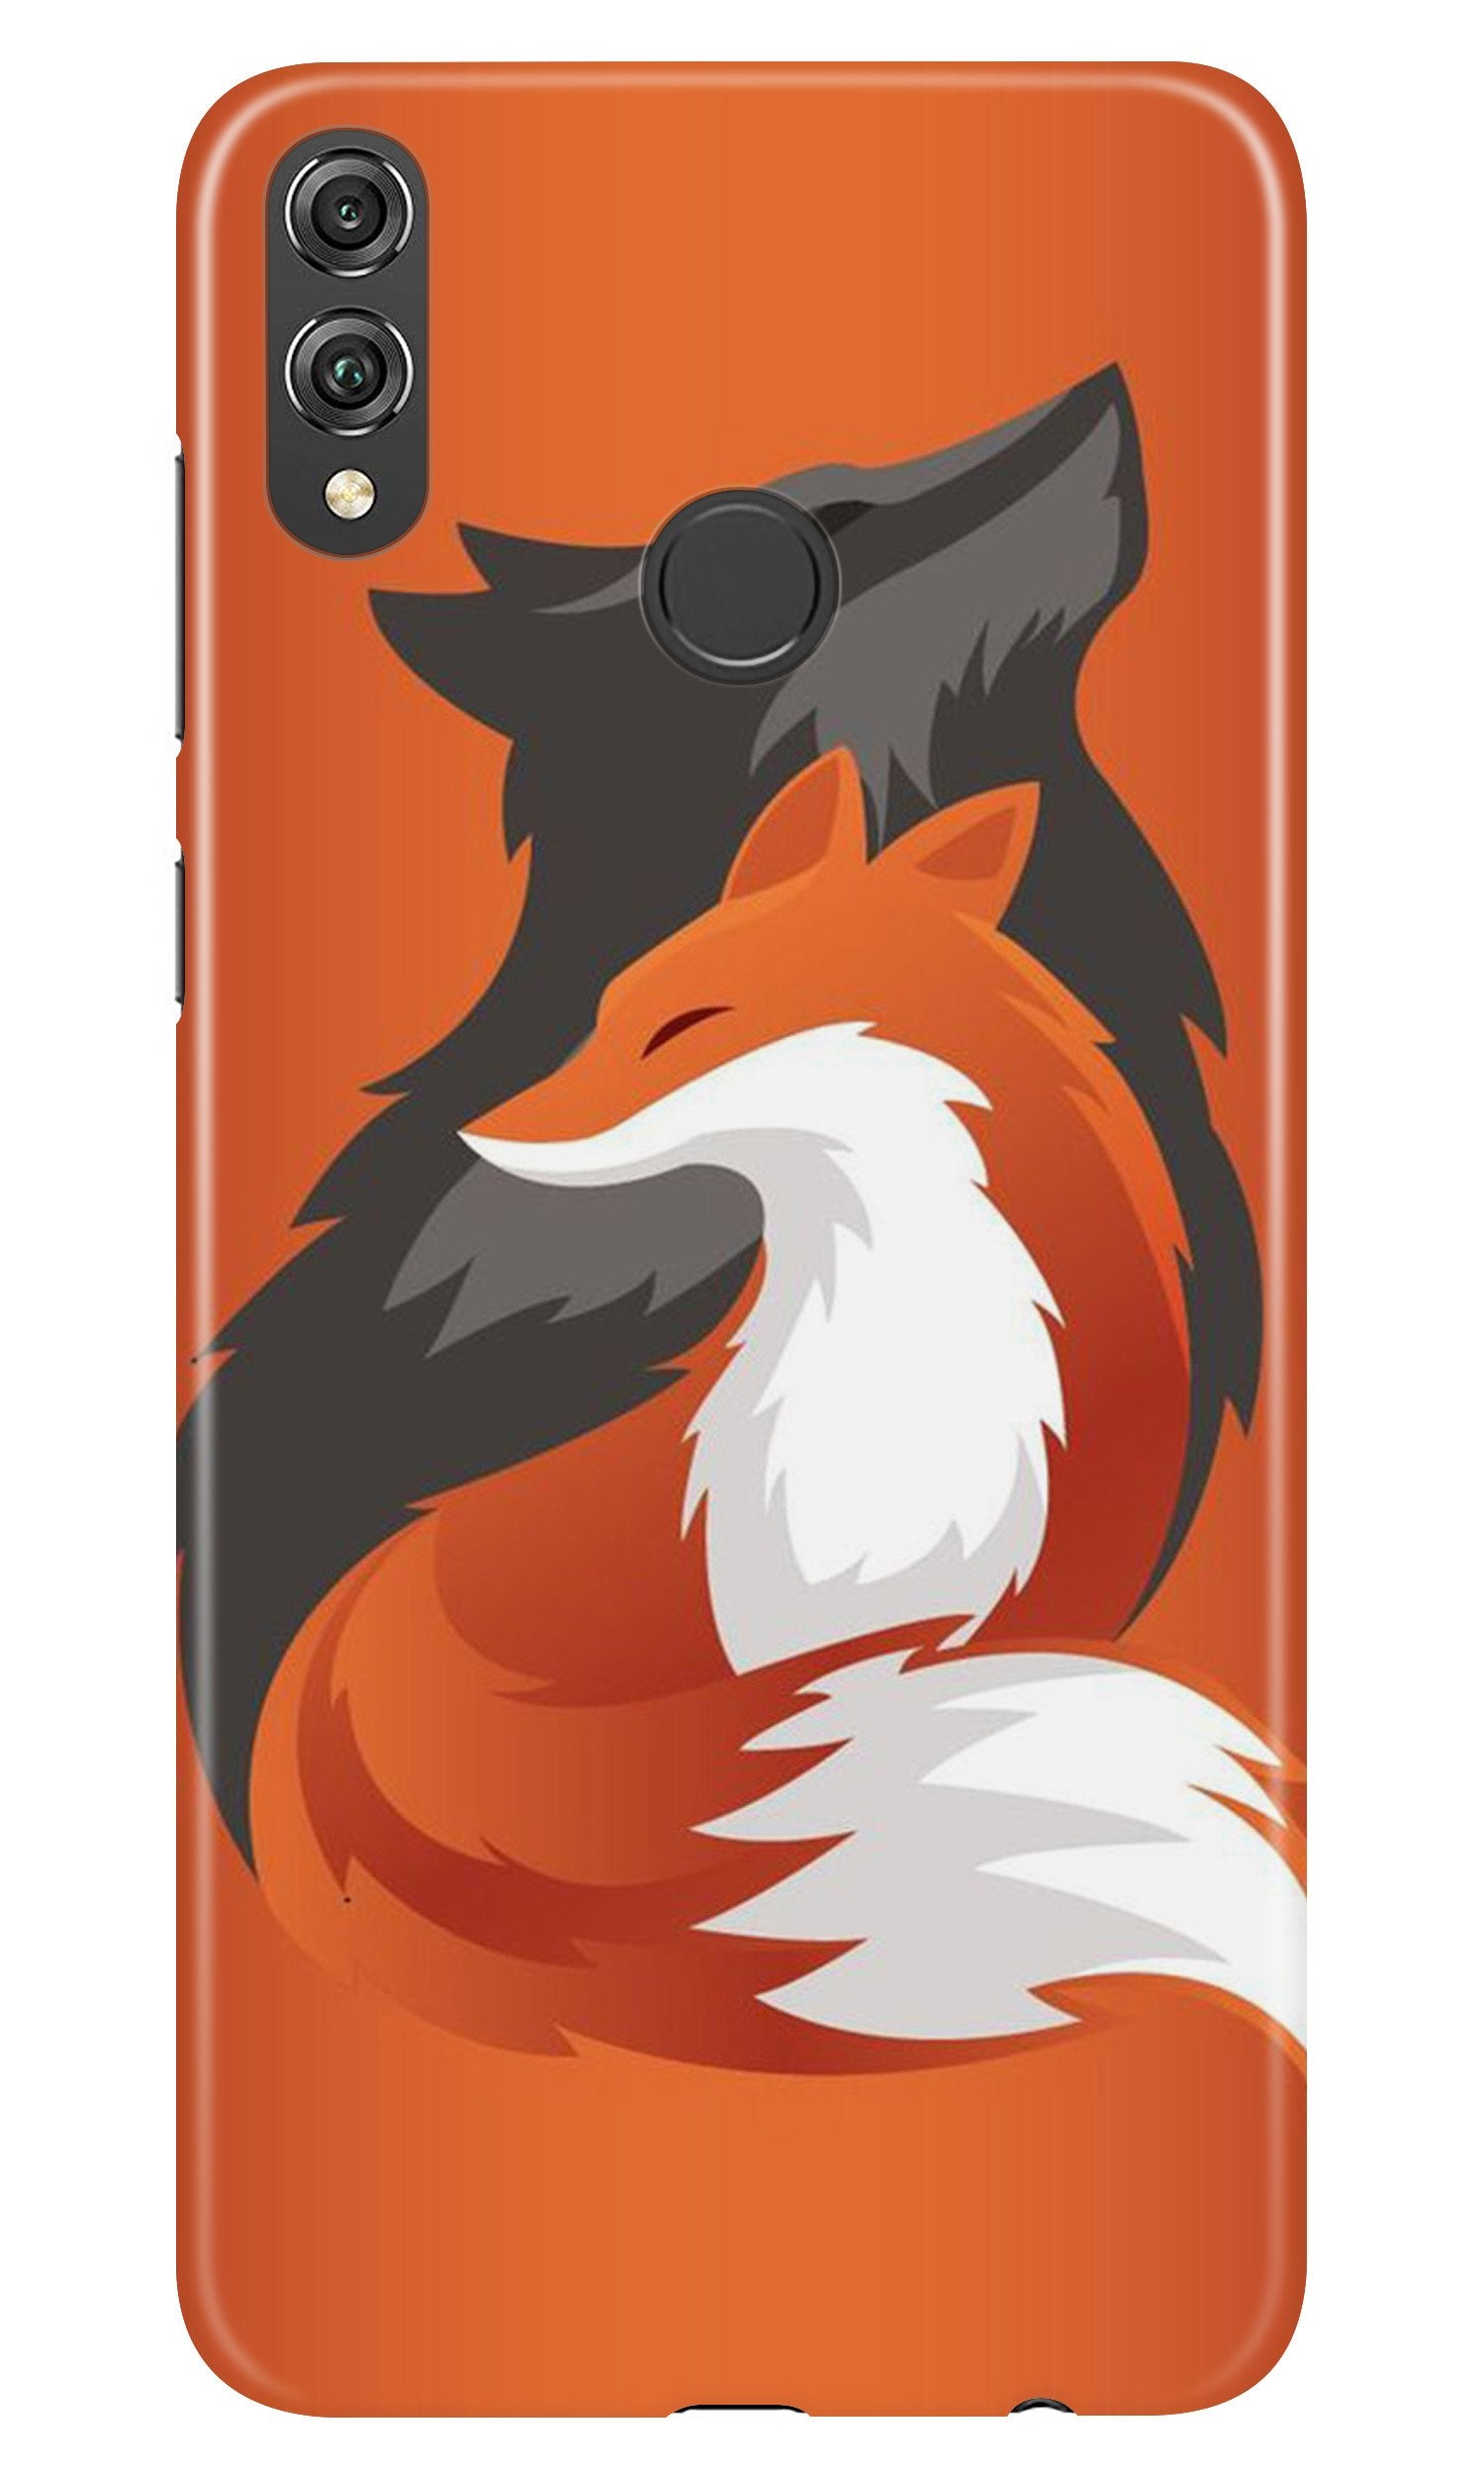 Wolf  Case for Infinix Hot 7 Pro (Design No. 224)